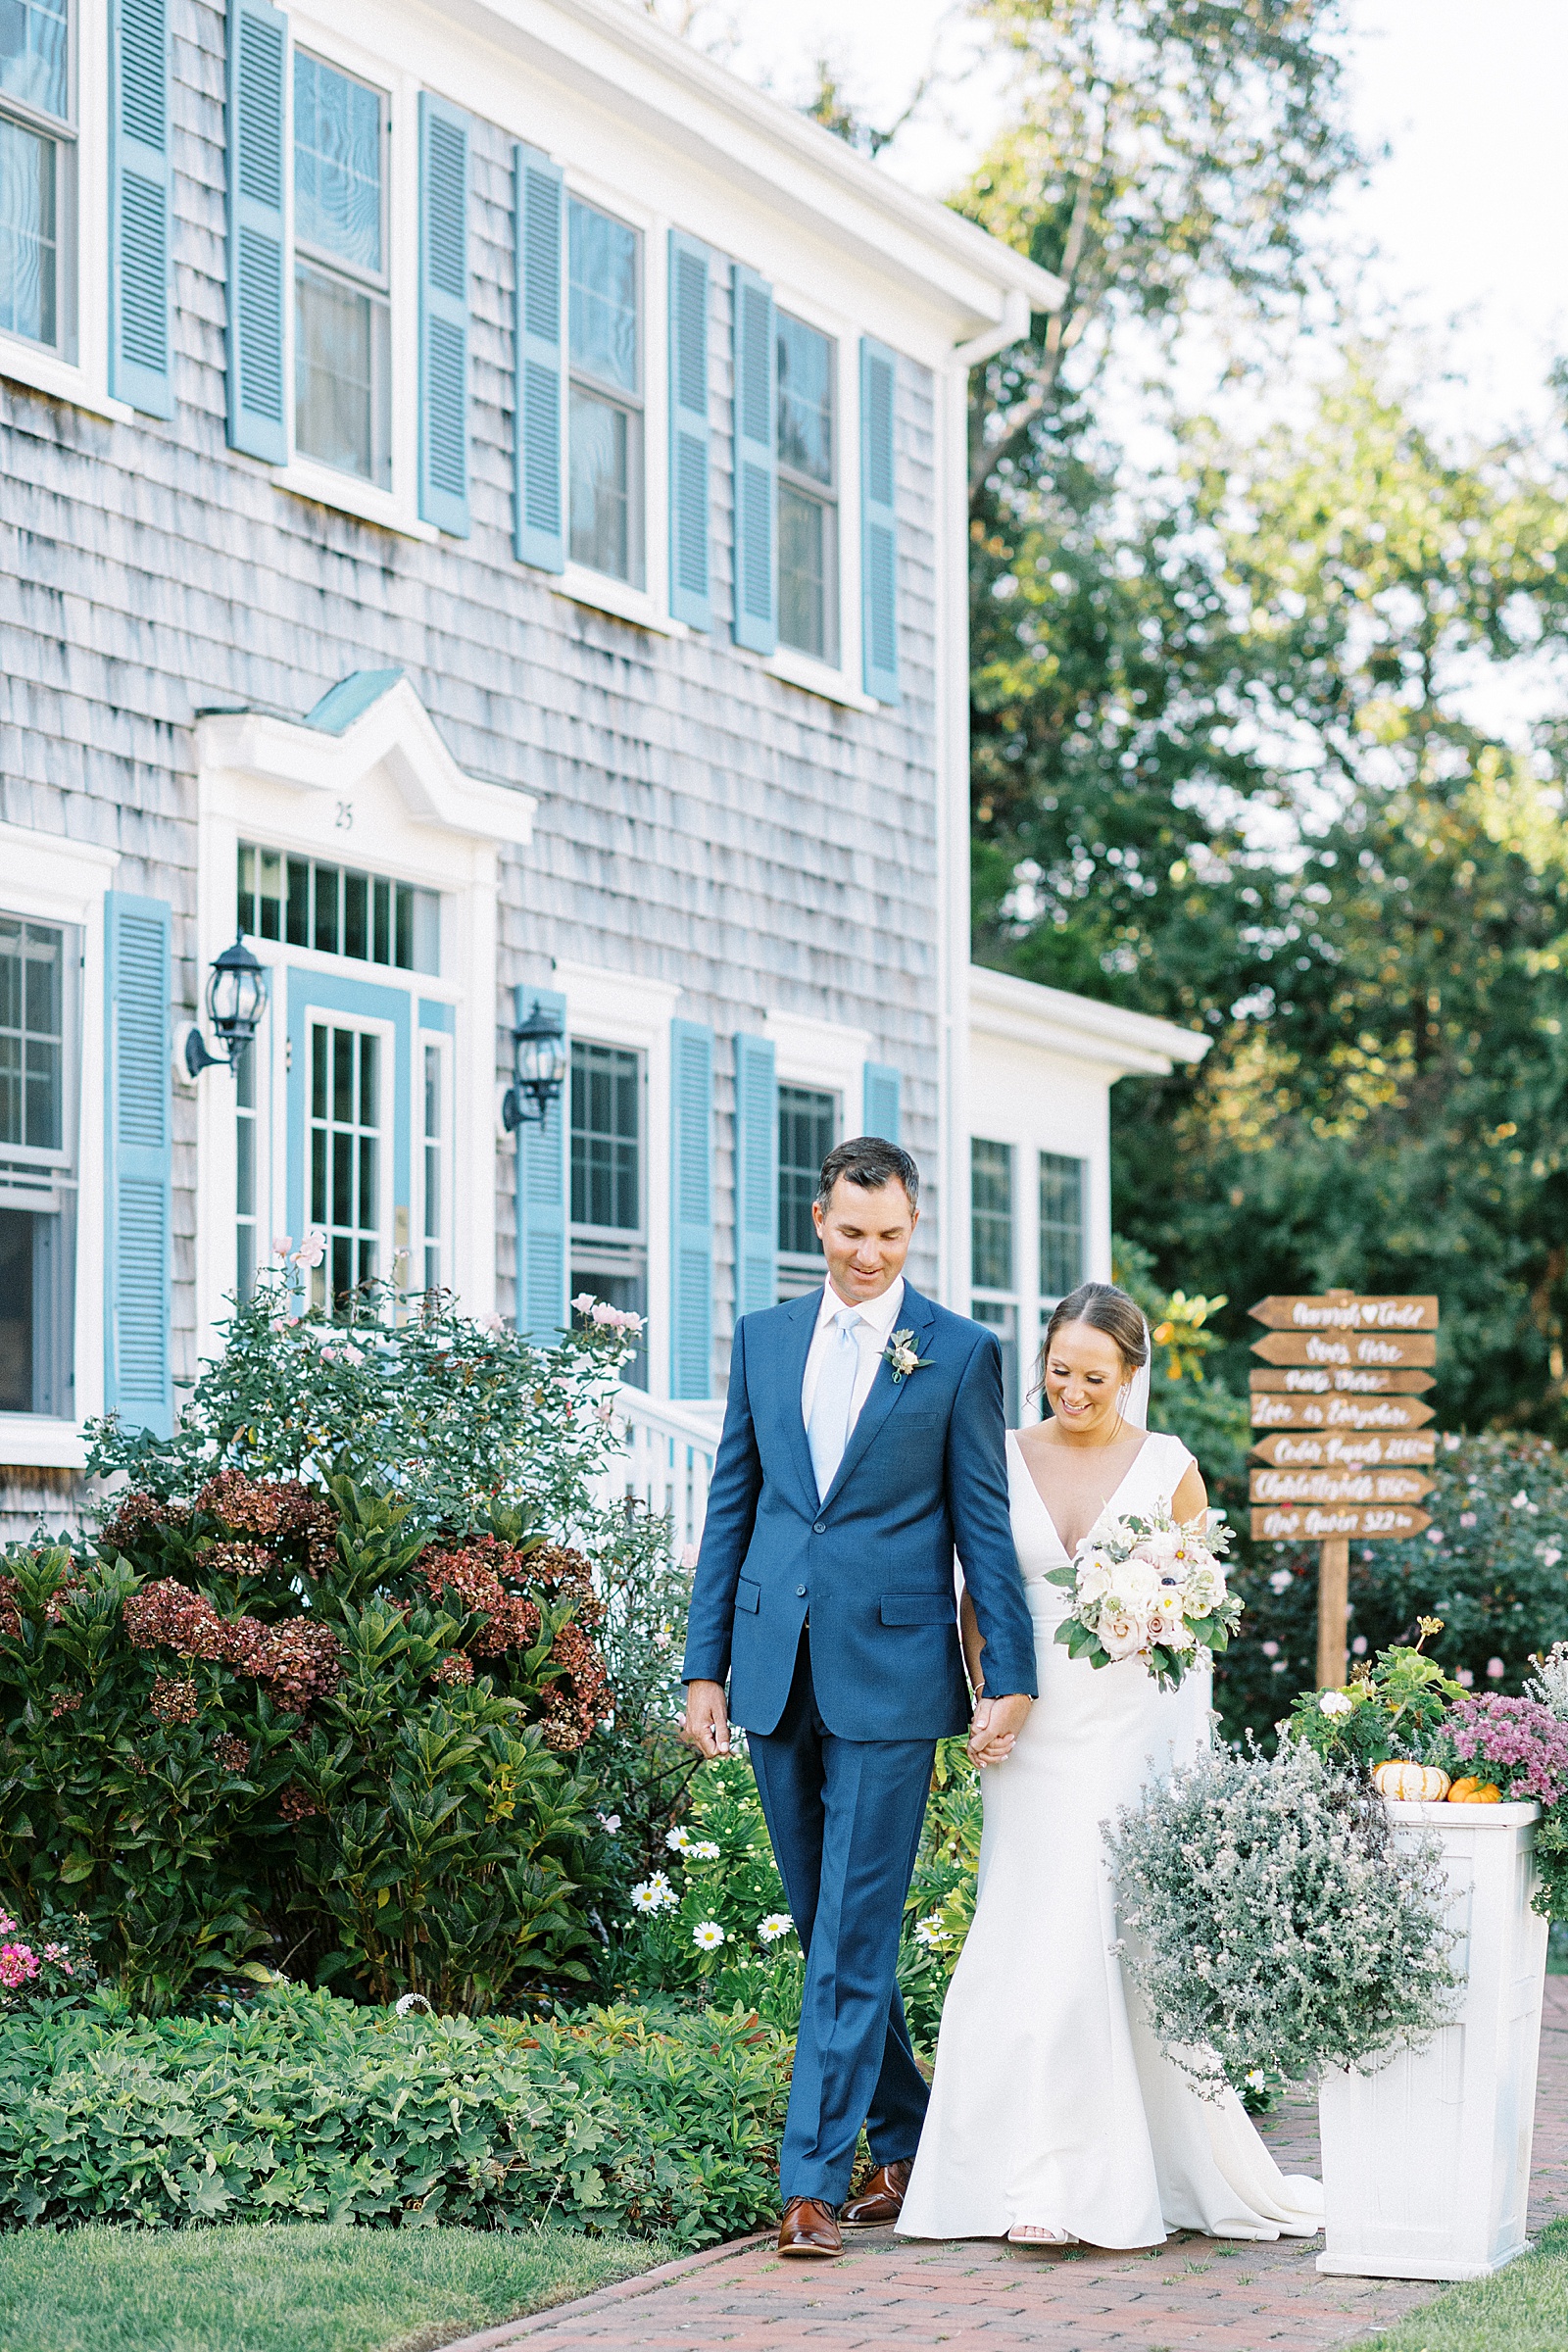 Bride and groom walking in front of Cape Cod house at wedding with Boston Wedding Photographer.